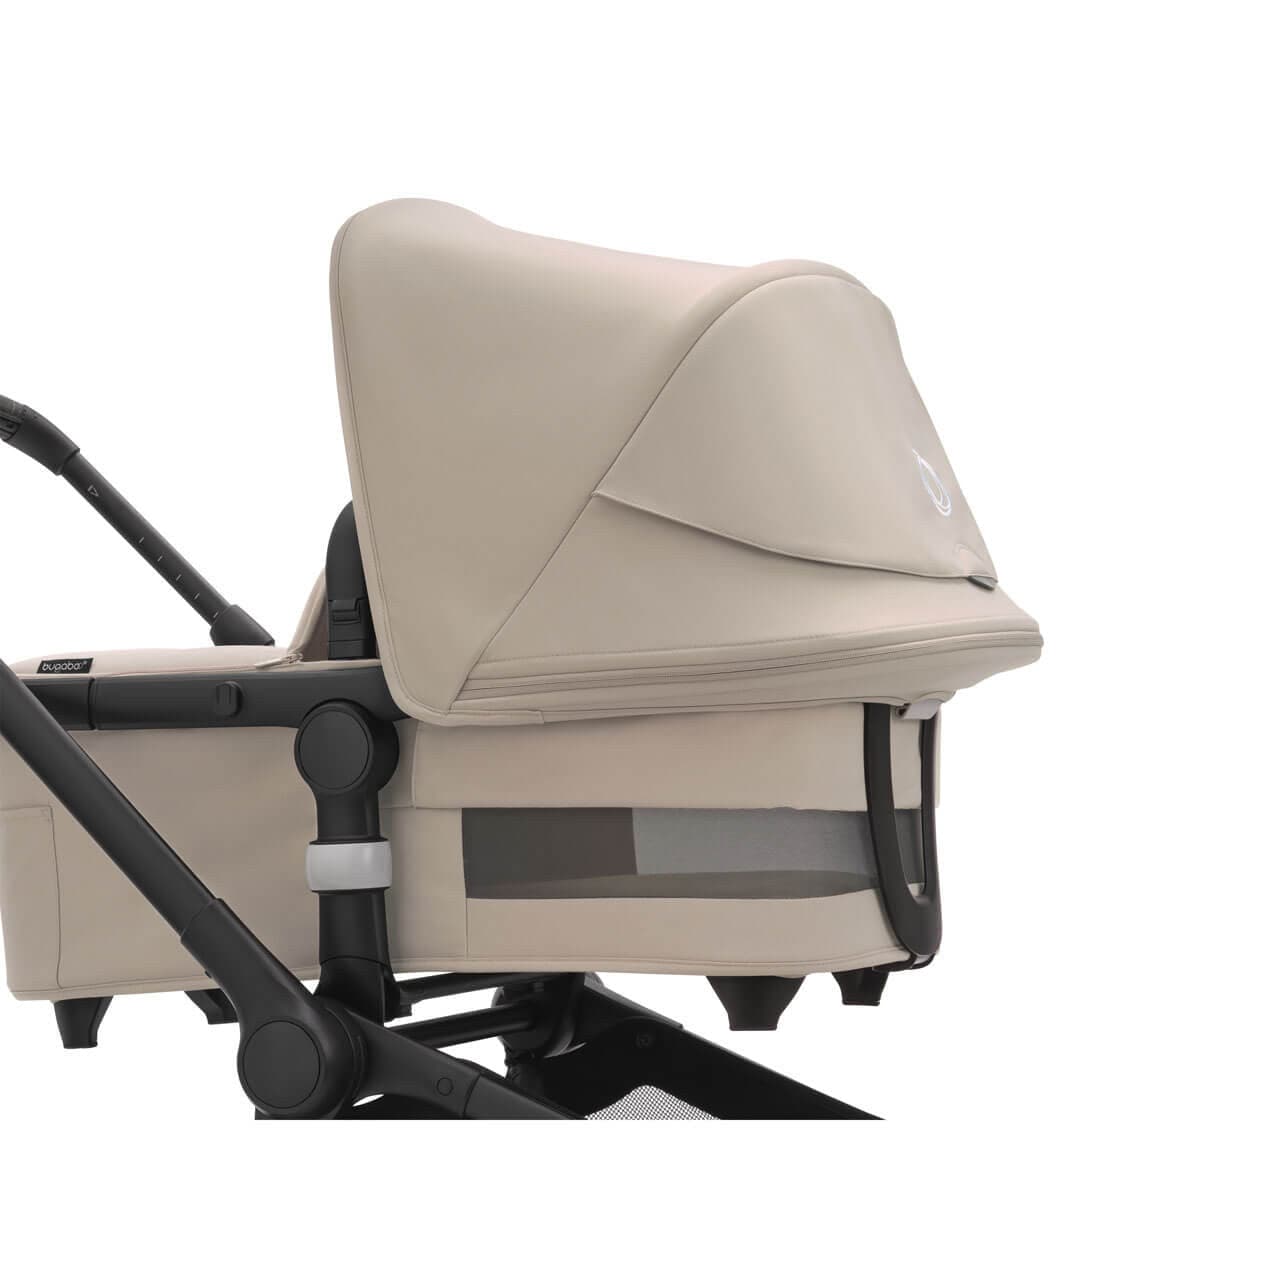 Bugaboo Fox 5 Complete Pushchair - Black / Desert Taupe - For Your Little One